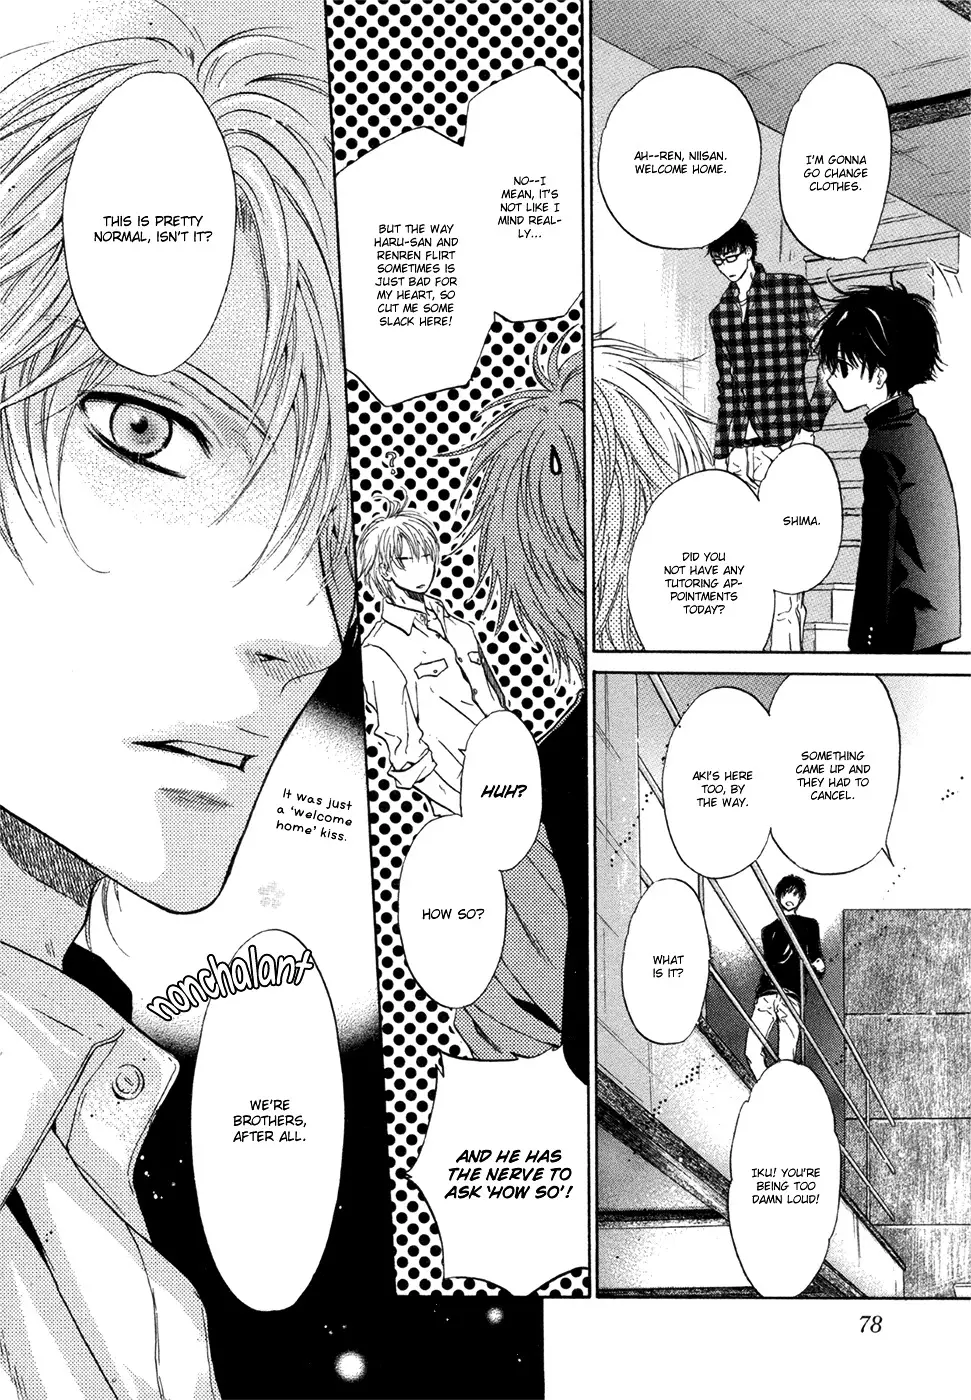 Super Lovers - 5 page 22-6559a5ed